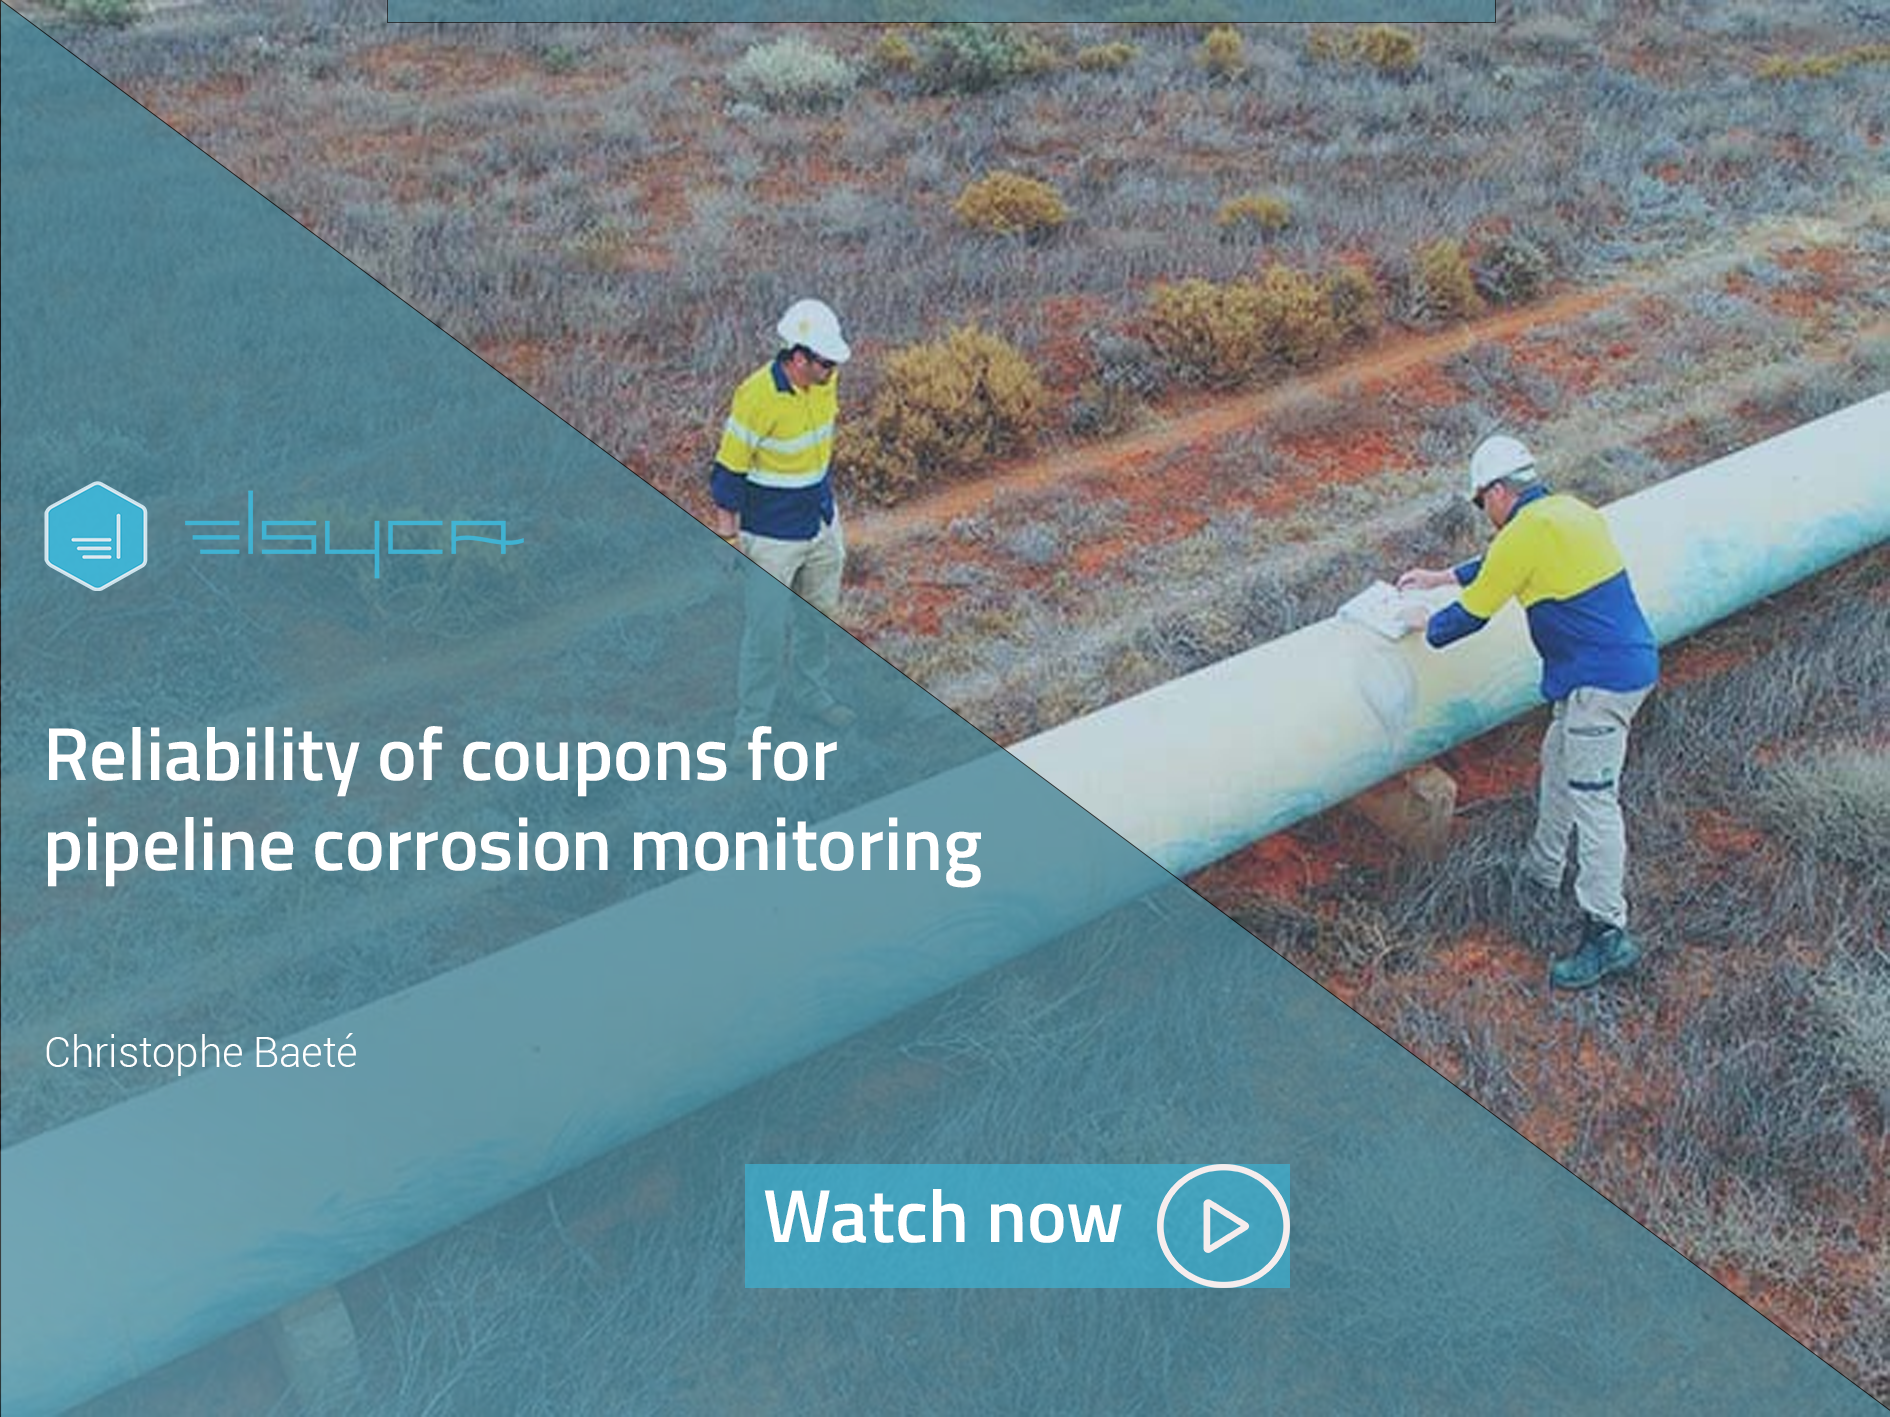 Reliability of coupons for pipeline corrosion monitoring